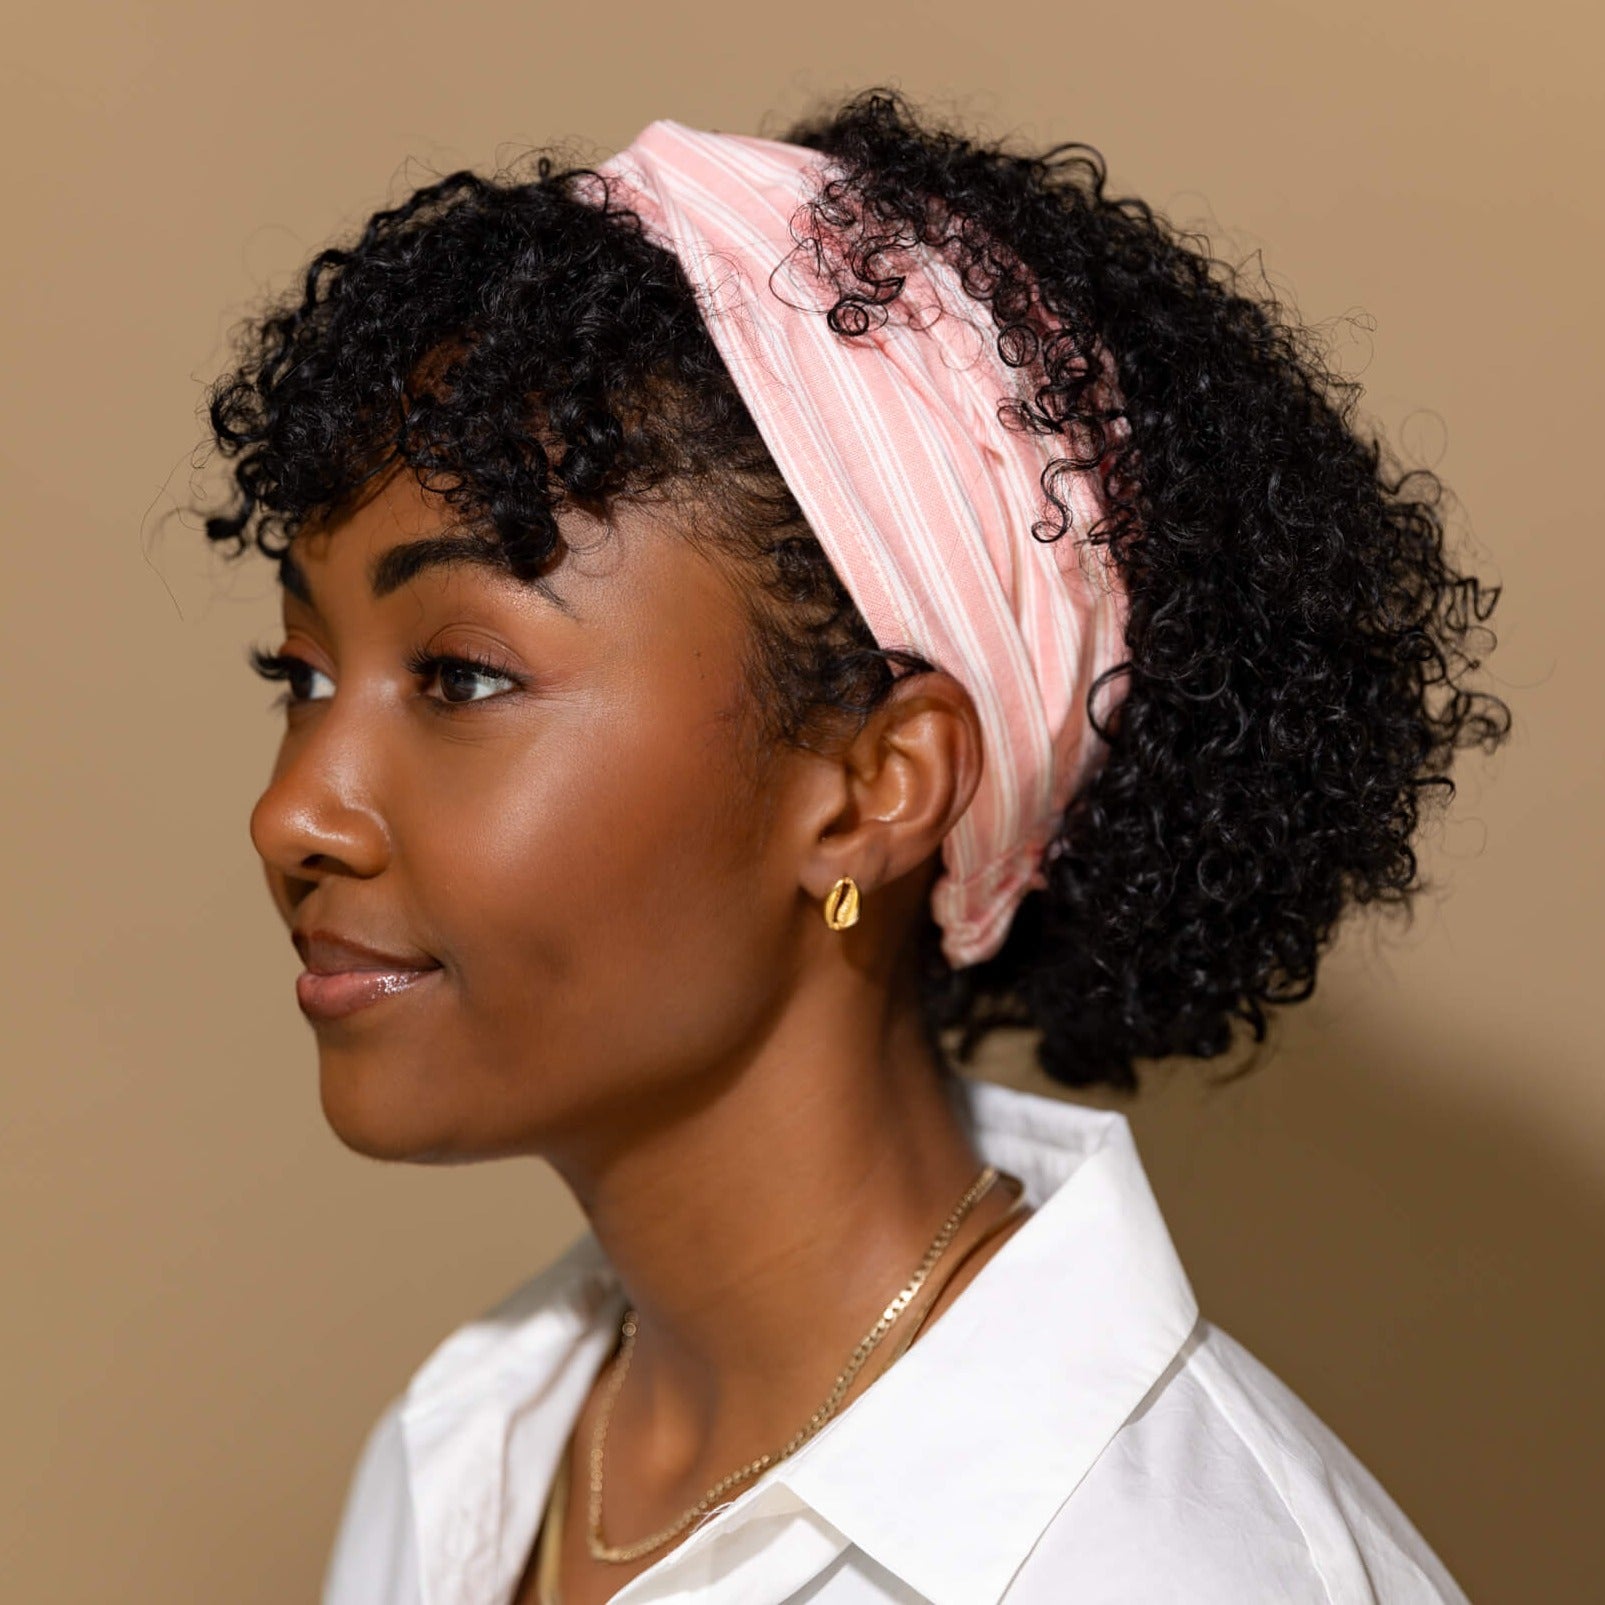 Currant Pink and White Stripe Pattern Woven Cotton Twisted Headband